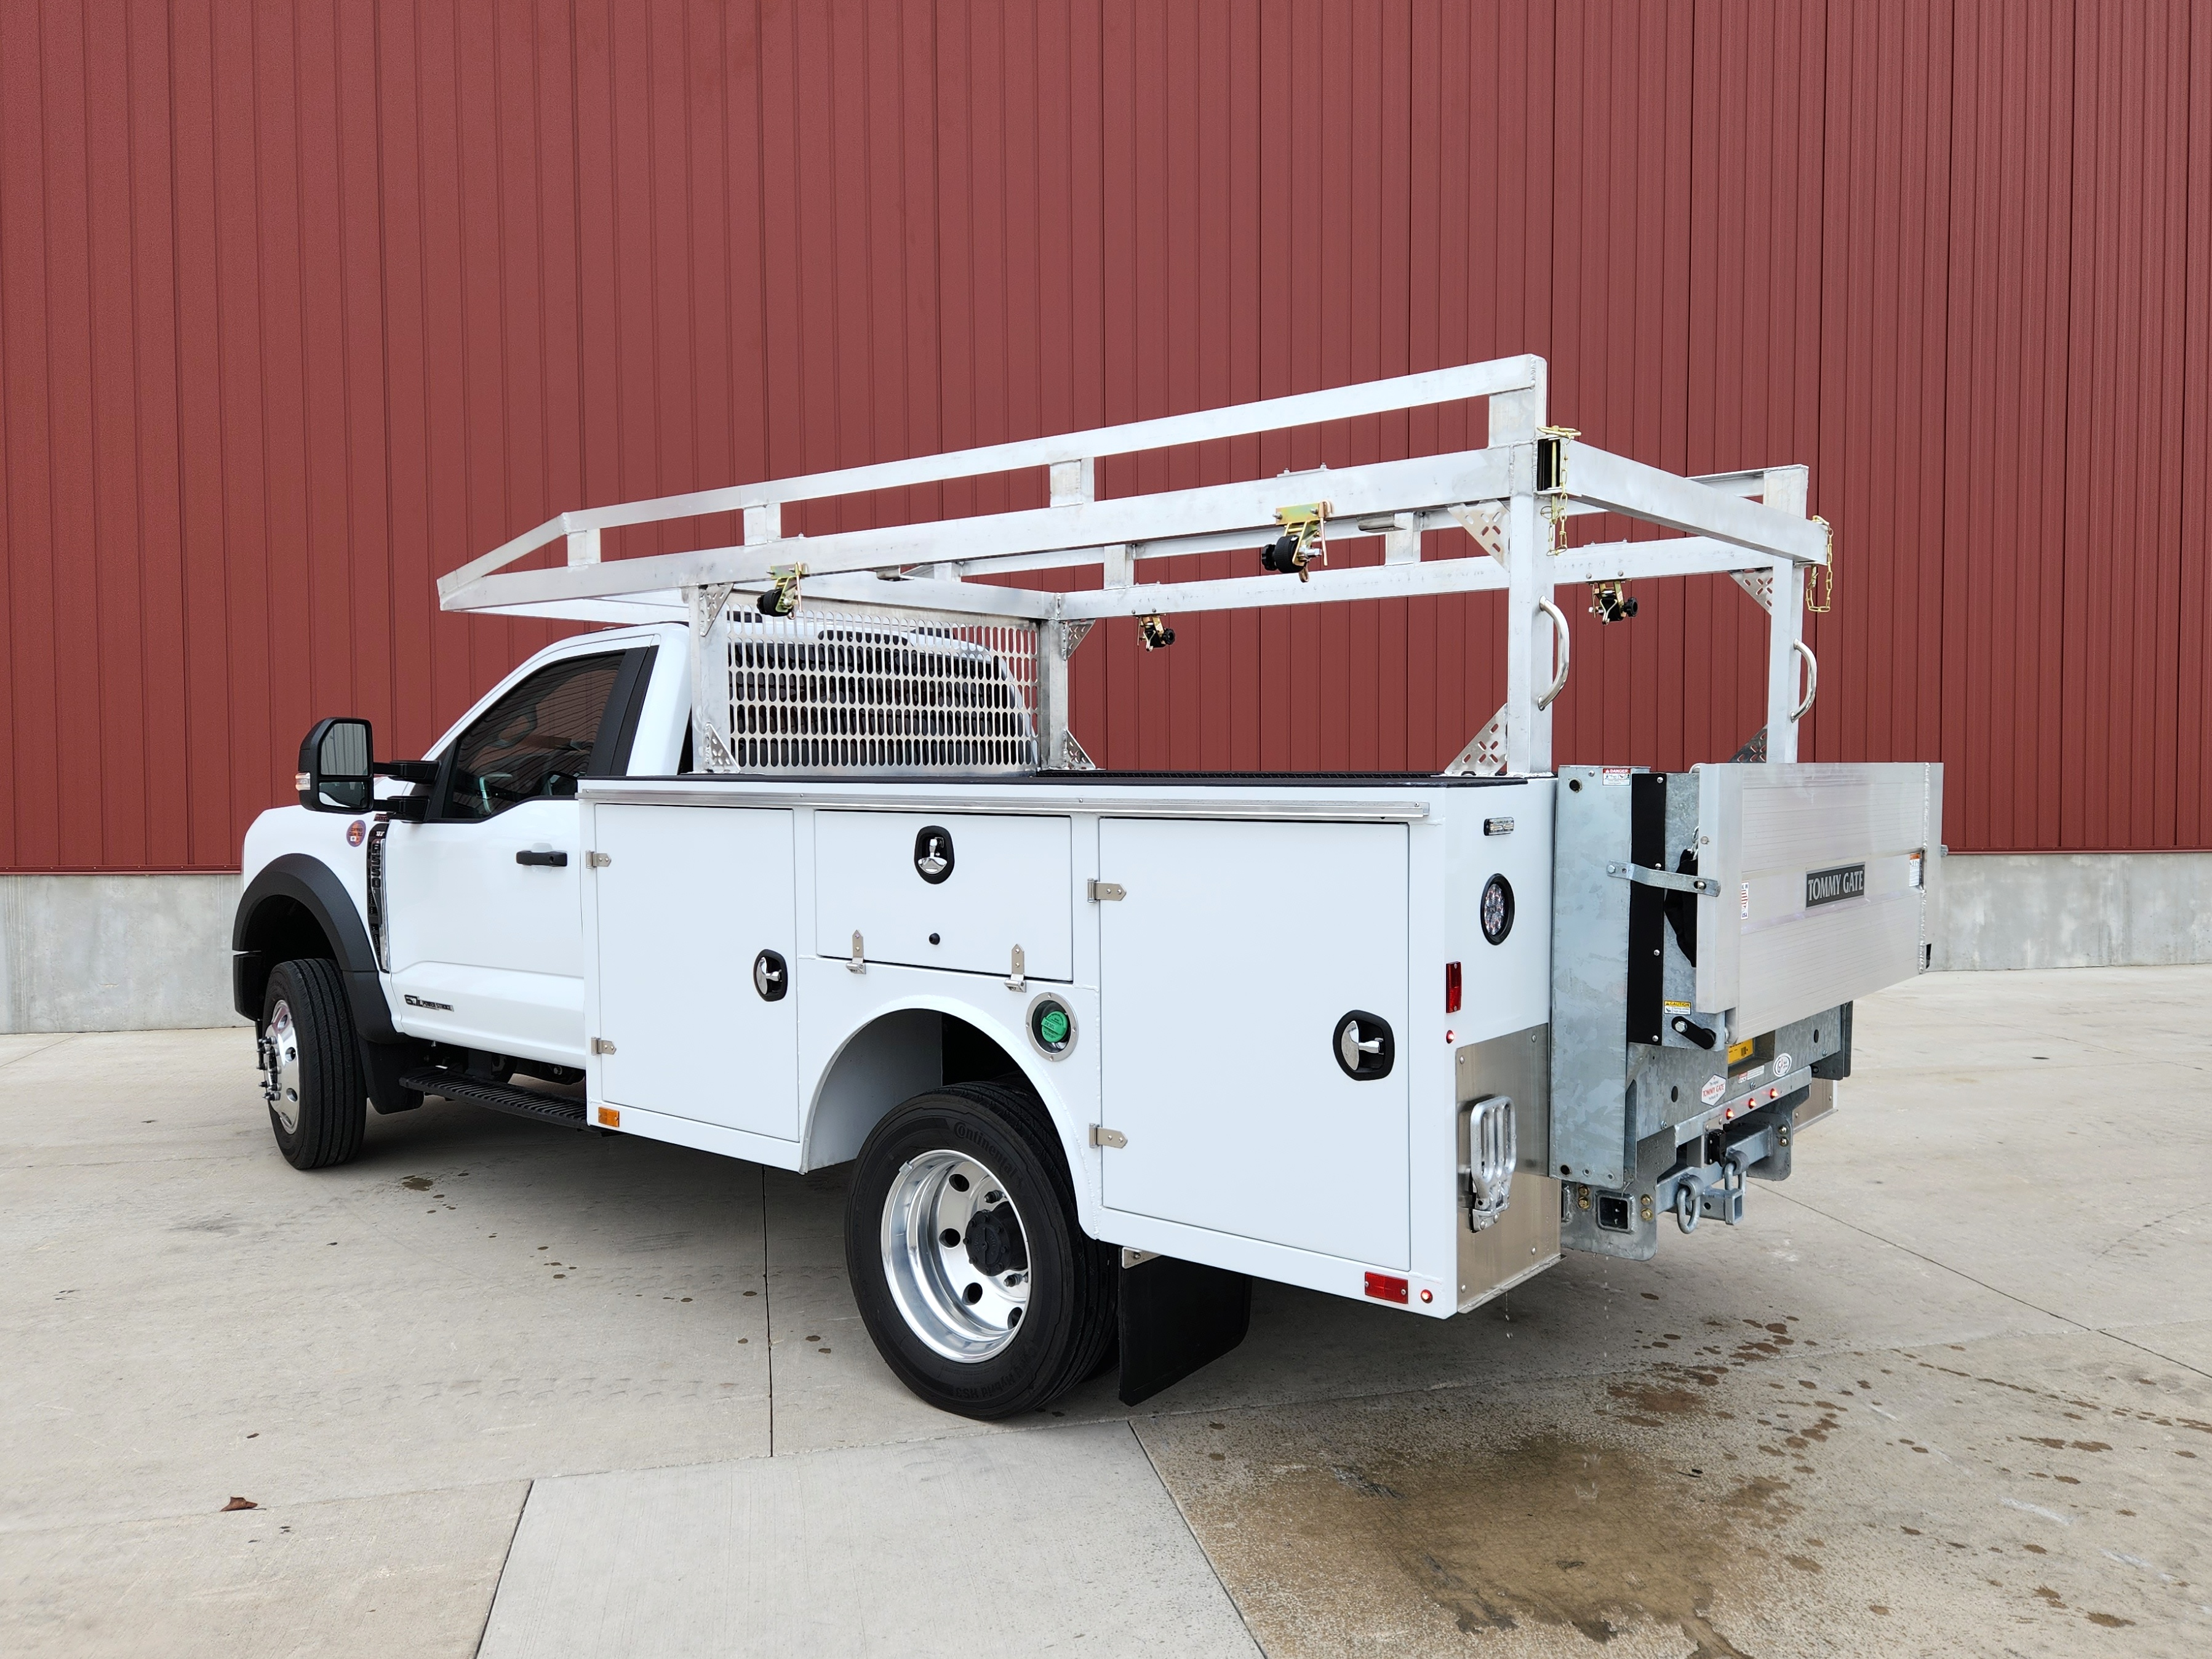 Left side rear view of a Sauber Mfg. Co. NexGen Aluminum Service Body. Shown in white with natural aluminum ladder rack and galvanized lift gate / bumper assembly with hitch. The truck is shown in front of a red metal building on concrete